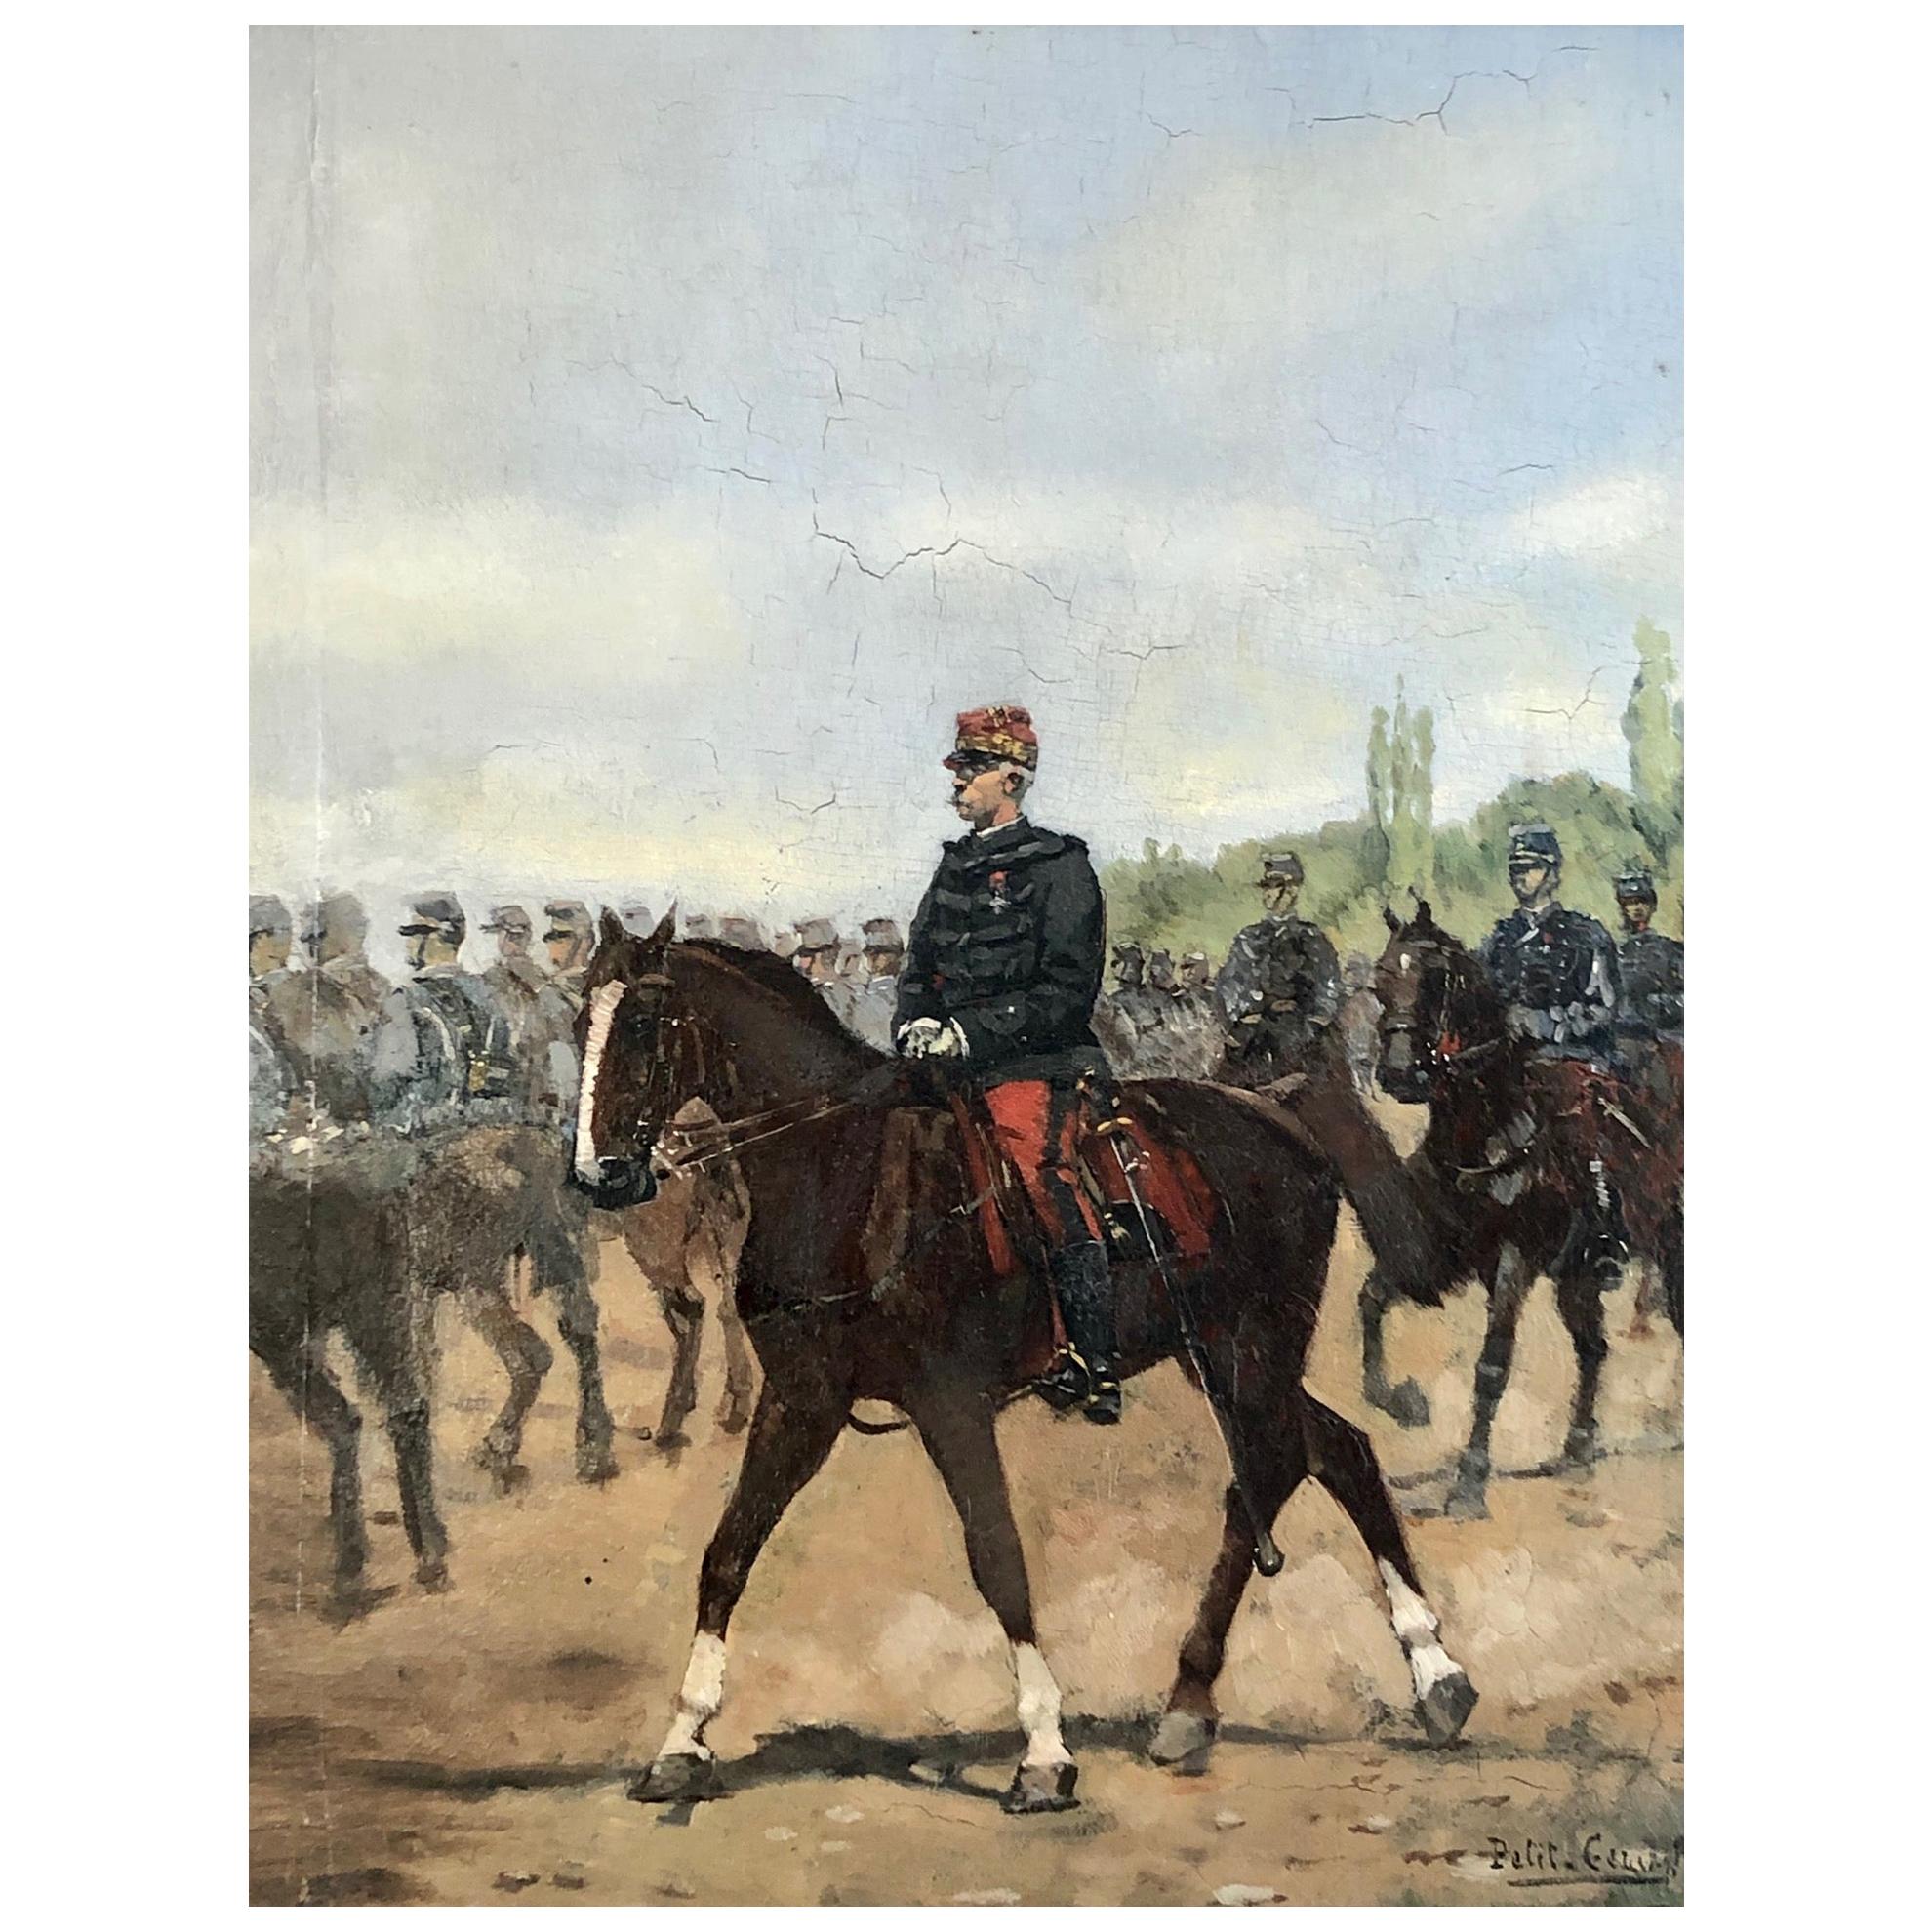 Stunning Painting of Mounted Horsemen by Listed French Artist Pierre Peti Gerard